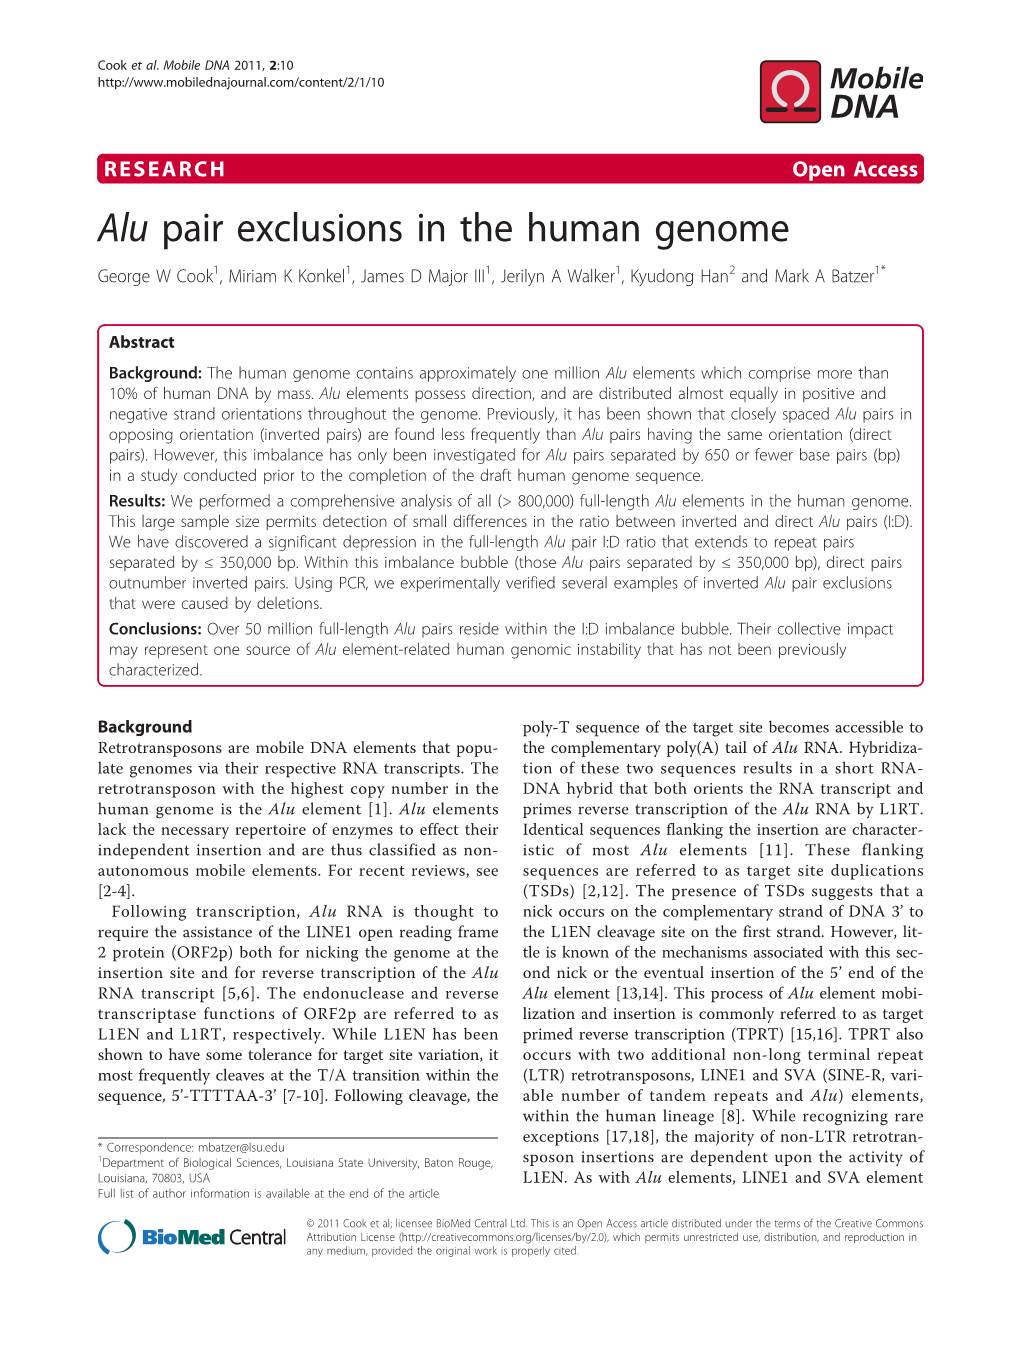 Alu Pair Exclusions in the Human Genome George W Cook1, Miriam K Konkel1, James D Major III1, Jerilyn a Walker1, Kyudong Han2 and Mark a Batzer1*